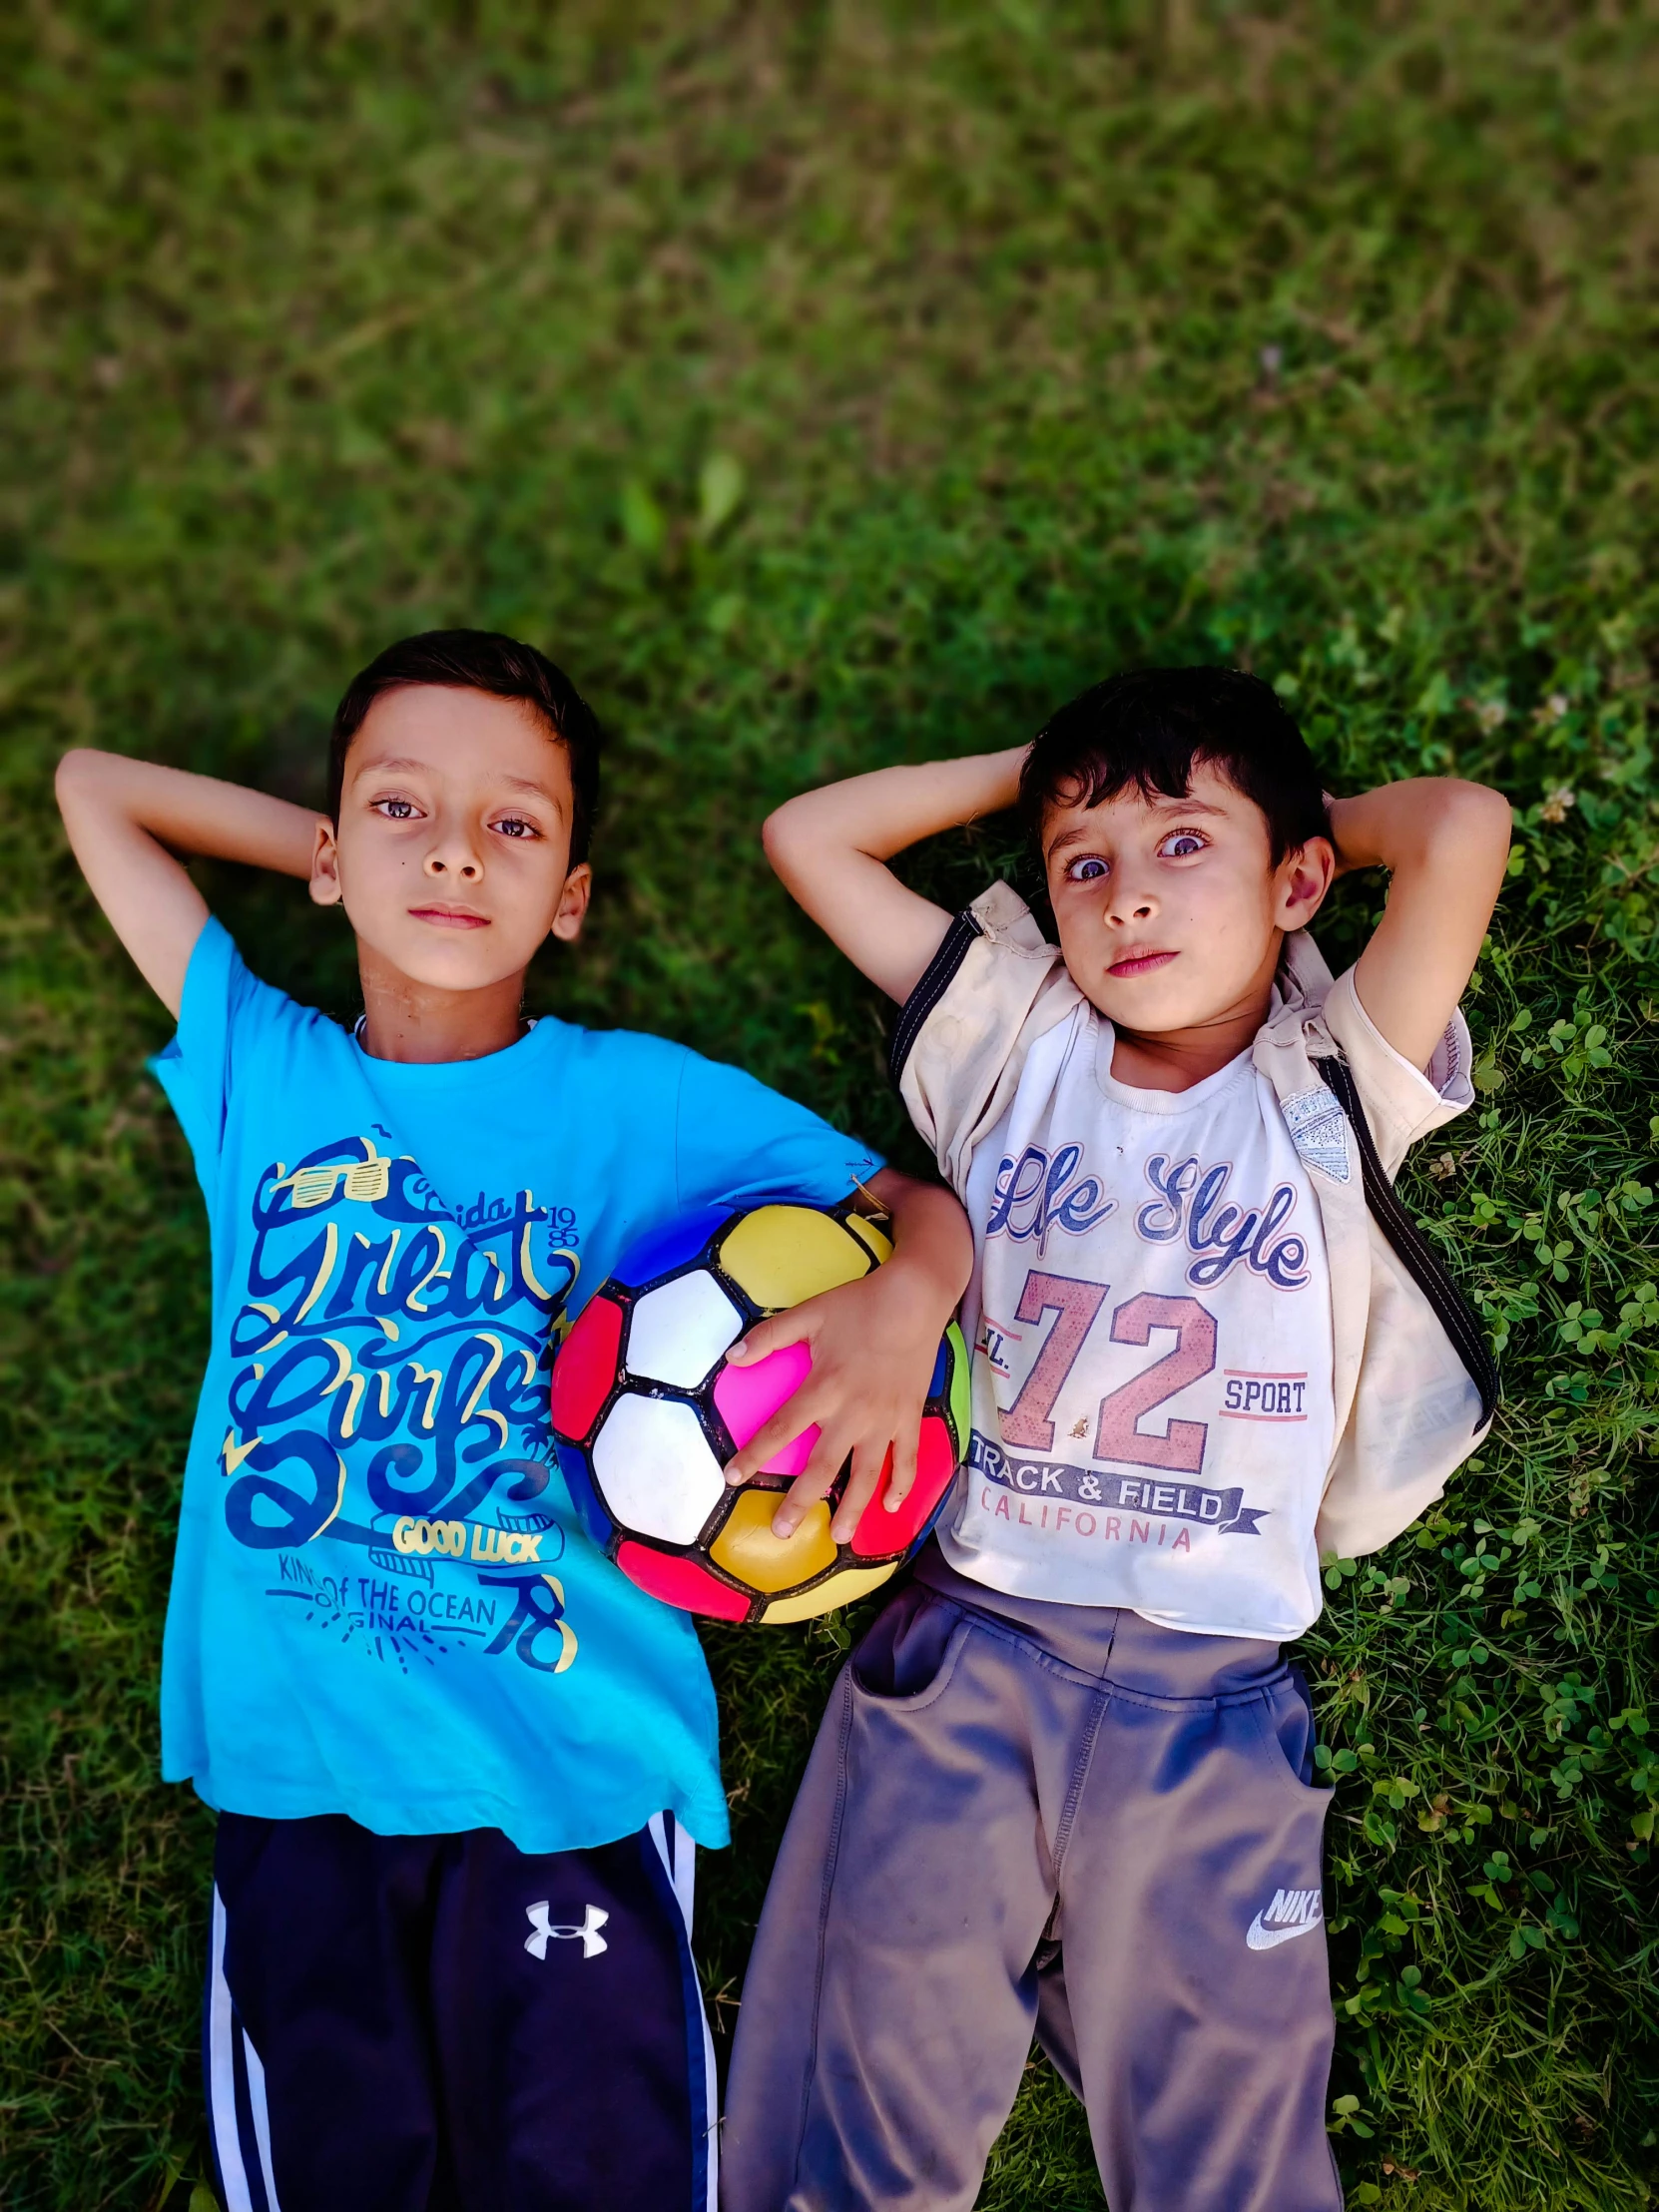 two children are posing for the camera in a grassy area